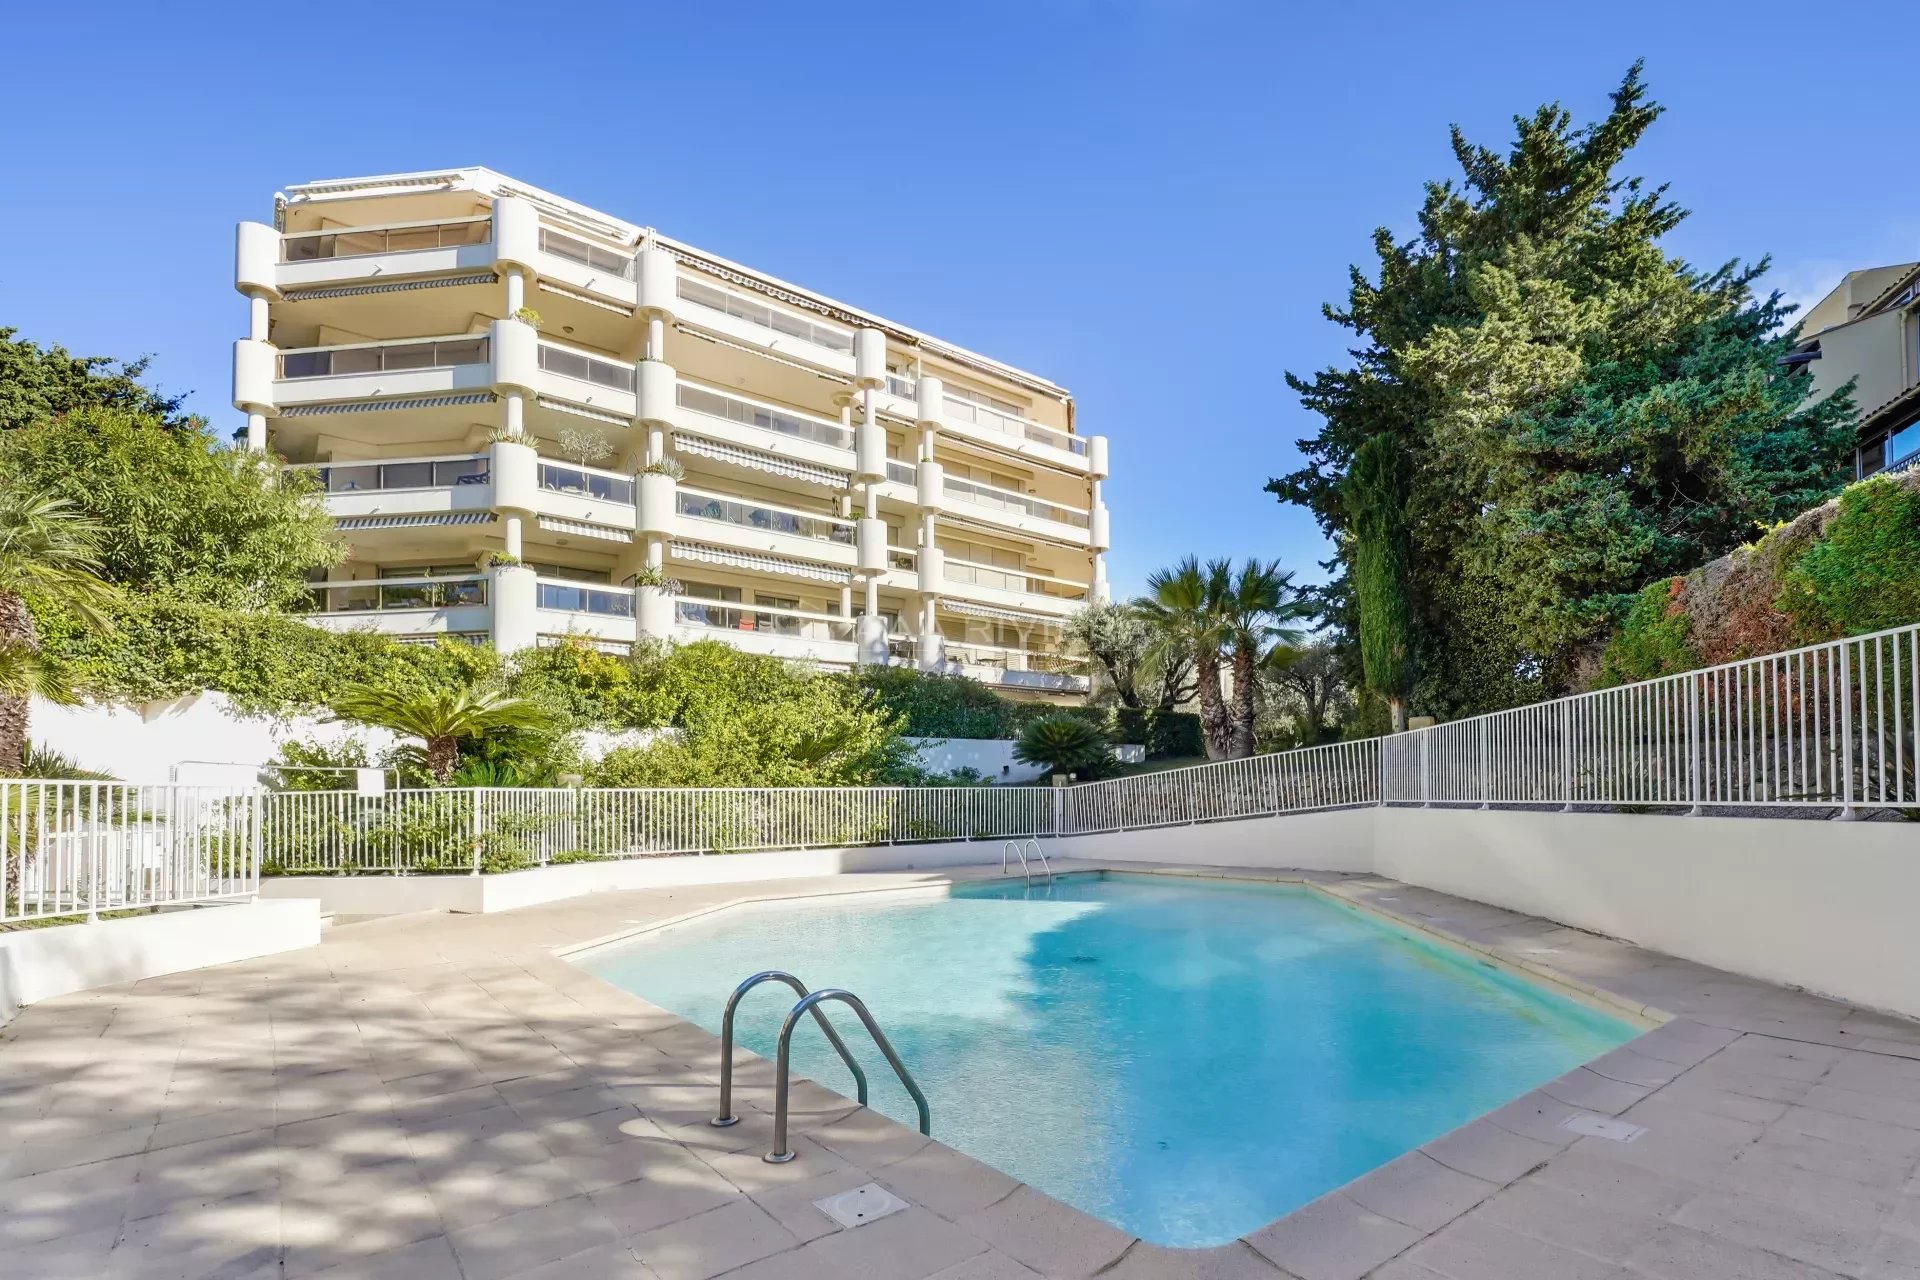 Sole Agent - Juan Les Pins - Bright 2 bedroom apt with terrace a short walk from sandy beaches - Pool. Garage. Caretaker.